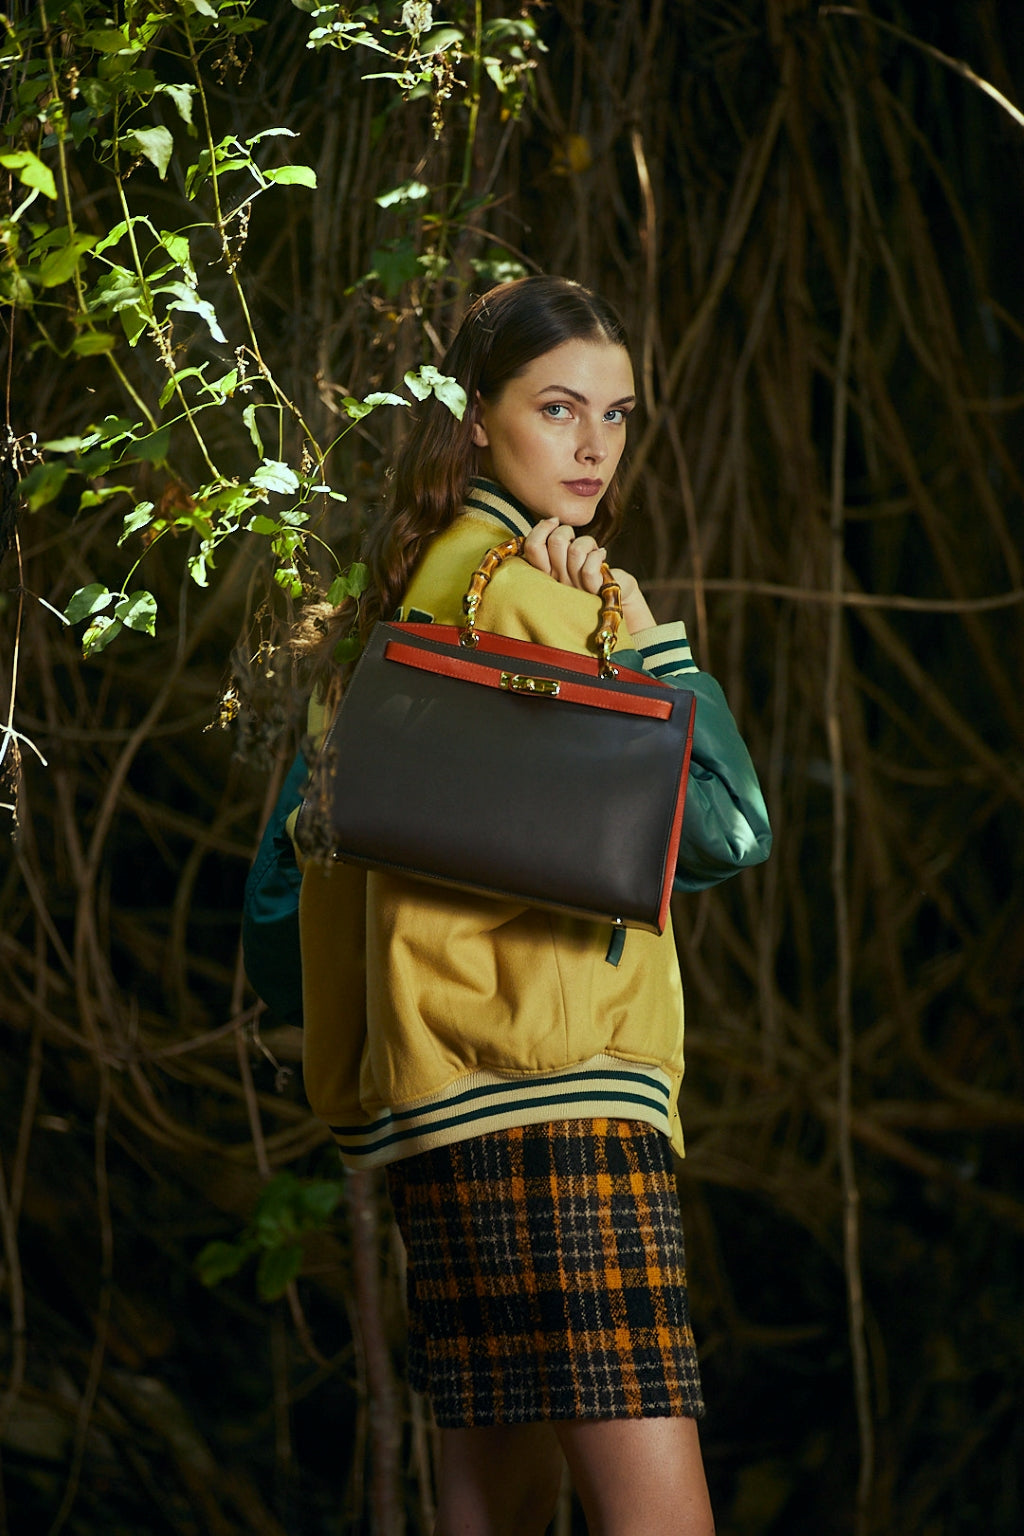 Woman posing with a stylish handbag in a forest setting